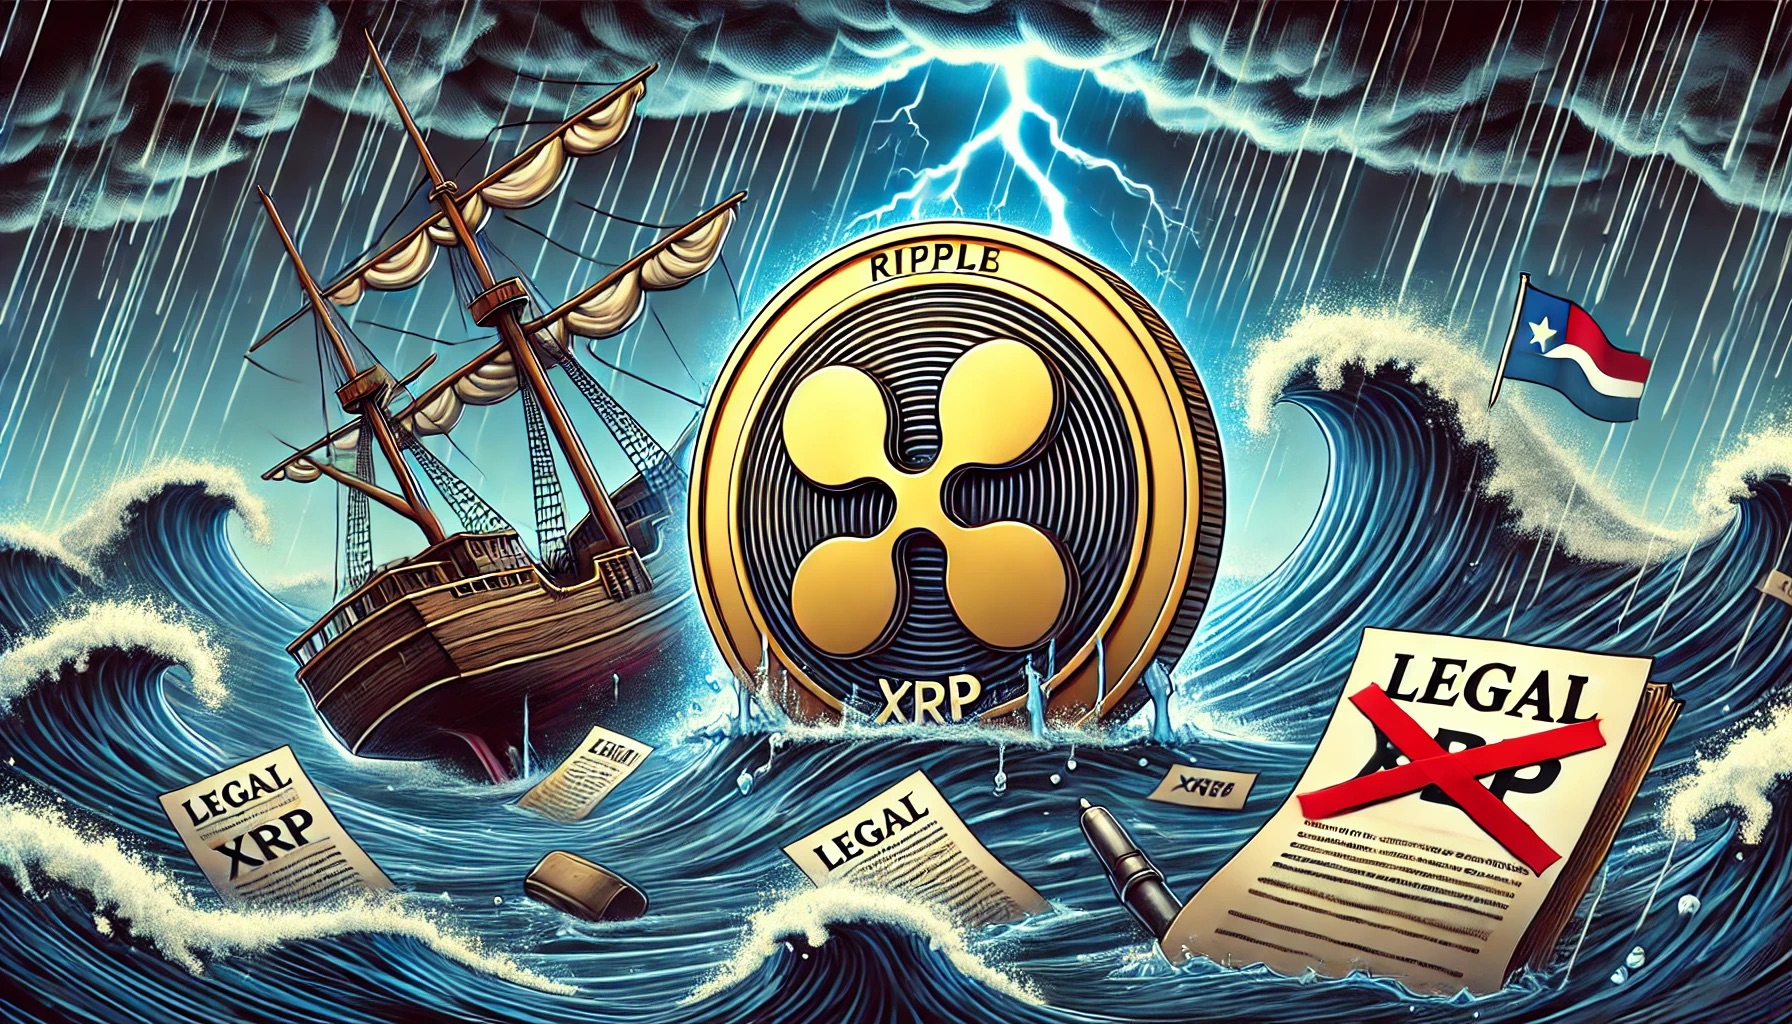 Crypto analyst Alessio Rastani has warned that XRP is in “trouble” following his recent analysis of the chart. He outlined certain “strong warnings” on the chart, which showed that the crypto token could experience further price declines. Why XRP Is In Trouble Rastani mentioned in a video on his YouTube channel that XRP could drop to $0.13 or even lower as part of Wave C of his analysis using the Elliot Wave Theory. He noted that a drop to that price level represents about a 100% decline for XRP from Wave B and a similar corrective move to Wave A that occurred in 2020. Related Reading: Bitwise CIO Expects $15 Billion To Flow Into Spot Ethereum ETFs, How Will ETH React? The crypto analyst also alluded to the the altcoin’s bounce in 2020, around the time the crypto token was declared a non-security. He claimed that the rally then overlapped, which suggested it was a corrective bounce. He noted that these corrective rallies are bearish in nature as they usually resolve to the downside. Rastani claimed that an impulsive rally is required for XRP to continue its uptrend. That is why he believes that XRP can still drop lower since the corrective rally from 2022 is still in play. The analyst also highlighted the support levels at $0.41 and $0.35 as crucial, stating that a break below those levels will serve as confirmation for the downward move to $0.2 and $0.17. He added that XRP could even drop lower to $0.13. Meanwhile, Rastani predicts that this move could take several months, stating that the crypto token could drop to these levels by year-end or sometime in 2025. He also said that the altcoin needs to stay below the resistance levels at $0.64 and $0.74, as a break above those levels will invalidate his projections. Rastani also highlighted the momentum indicator on XRP’s chart, noting that there has been a lot of “downward negative momentum” for XRP recently, suggesting that a downward move will likely occur. He claimed that the downward momentum hasn’t been triggered yet, but he believes that it will soon happen, especially if the altcoin breaks below $0.35. An Alternative Move For Price Rastani also outlined an alternative move that XRP could make if his projections are invalidated, although he doubts that will happen. He claimed that if XRP manages to break above $0.64 and $0.74, that would mean that the rally in 2022 was Wave A, and the recent drop to around $0.40 was Wave B, thereby setting up XRP for a move to around $1.40 for Wave C. Related Reading: Dogecoin Sees Rapid Accumulation Amid Price Crash, Whale Transactions Soar The crypto analyst added that XRP could also retest the 2021 highs at around $2. However, he claimed that would mean that the next move is still downward, suggesting that the alternative move isn’t still bullish for XRP. He once again reaffirmed that the first scenario of XRP dropping to as low as $0.13 was likely to happen. Featured image created with Dall.E, chart from Tradingview.com